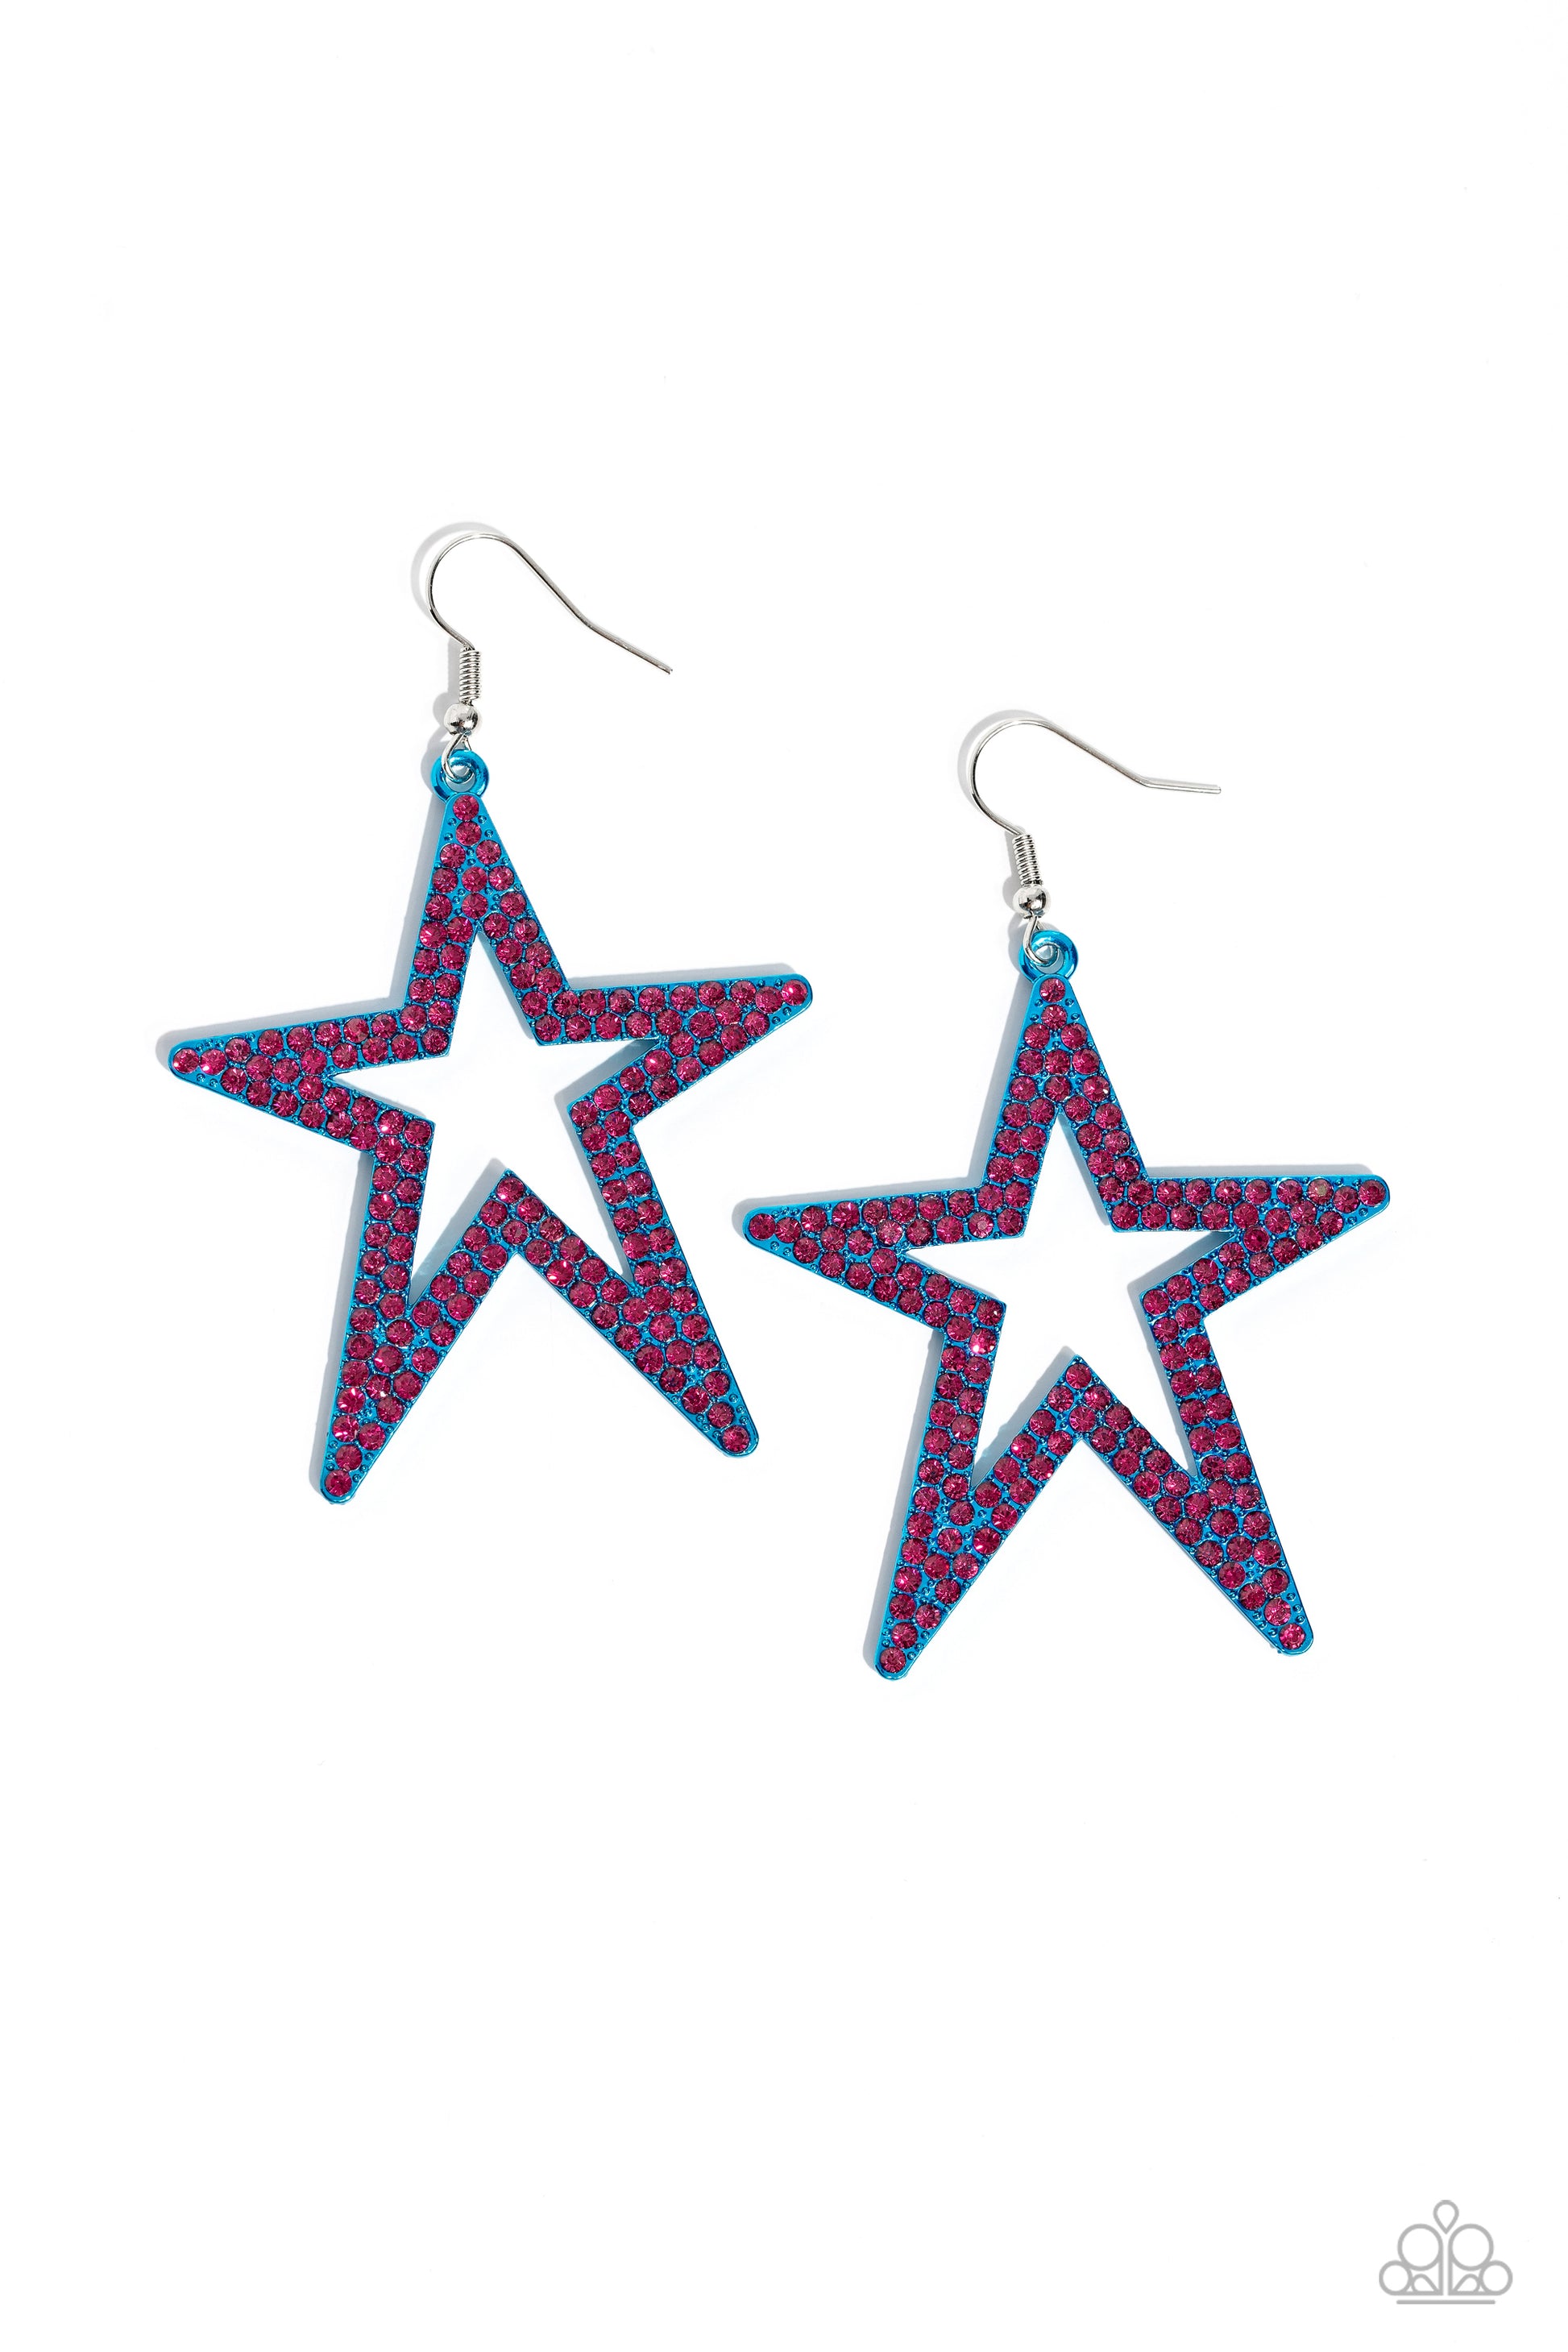 Double rows of fuchsia rhinestones adorn the front of an oversized blue metallic star silhouette, creating a stellar, sparkling centerpiece. Earring attaches to a standard fishhook fitting.  Sold as one pair of earrings.